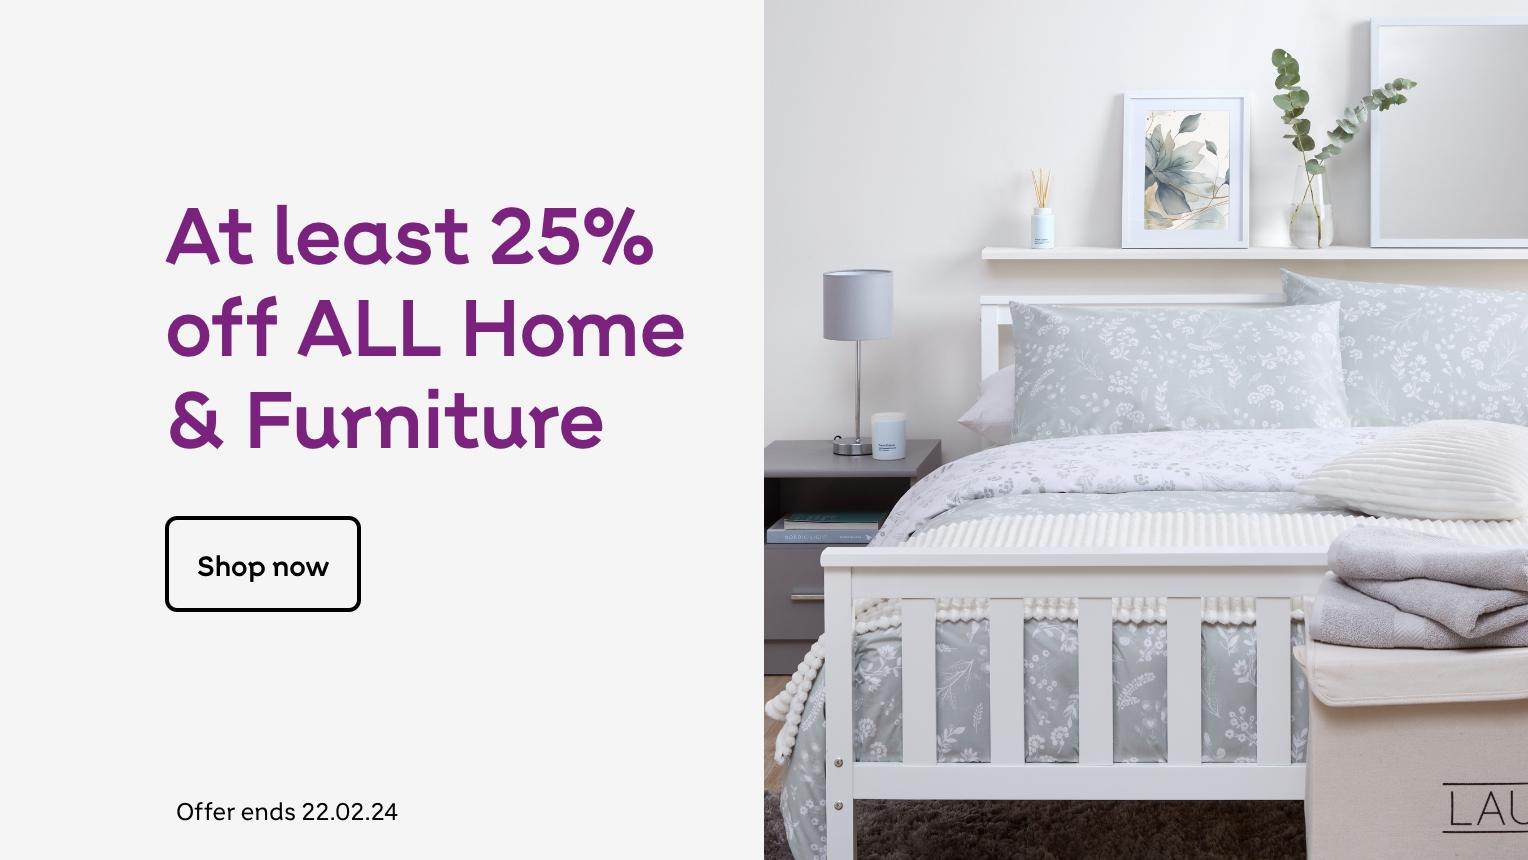 At least 25% off all home & furniture. Shop now. Offer ends 22.02.24